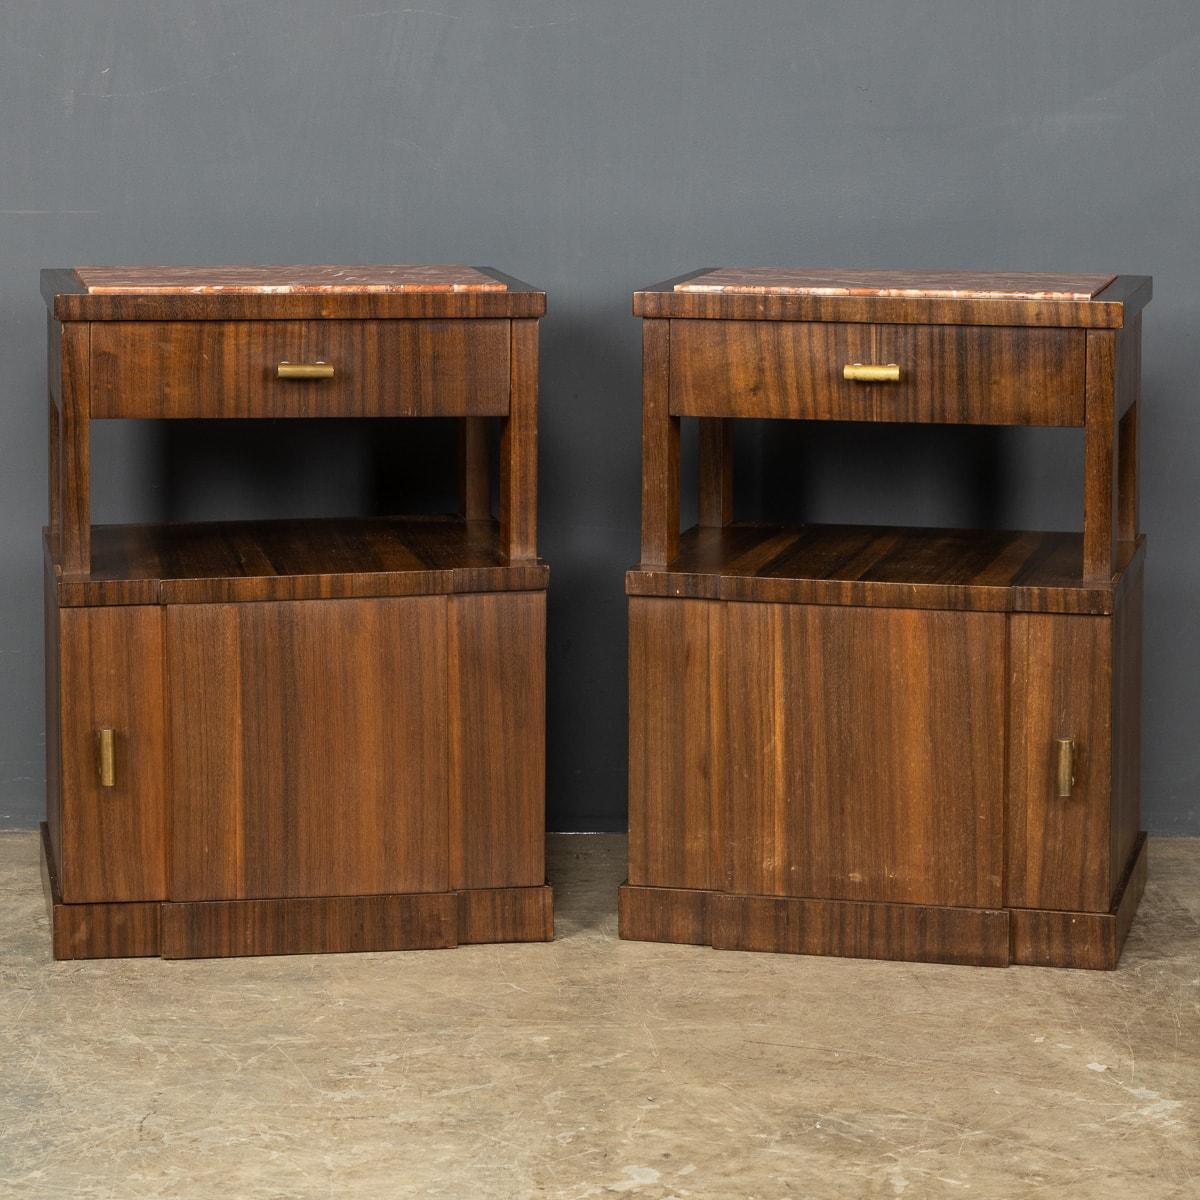 Mid-20th century pair of Italian bedside cabinets, made out of kingwood with a rose marble top. They each with a single drawer and cupboard.

CONDITION
In great condition - wear as expected.

SIZE
Width: 44cm
Height: 60cm
Depth: 40cm.